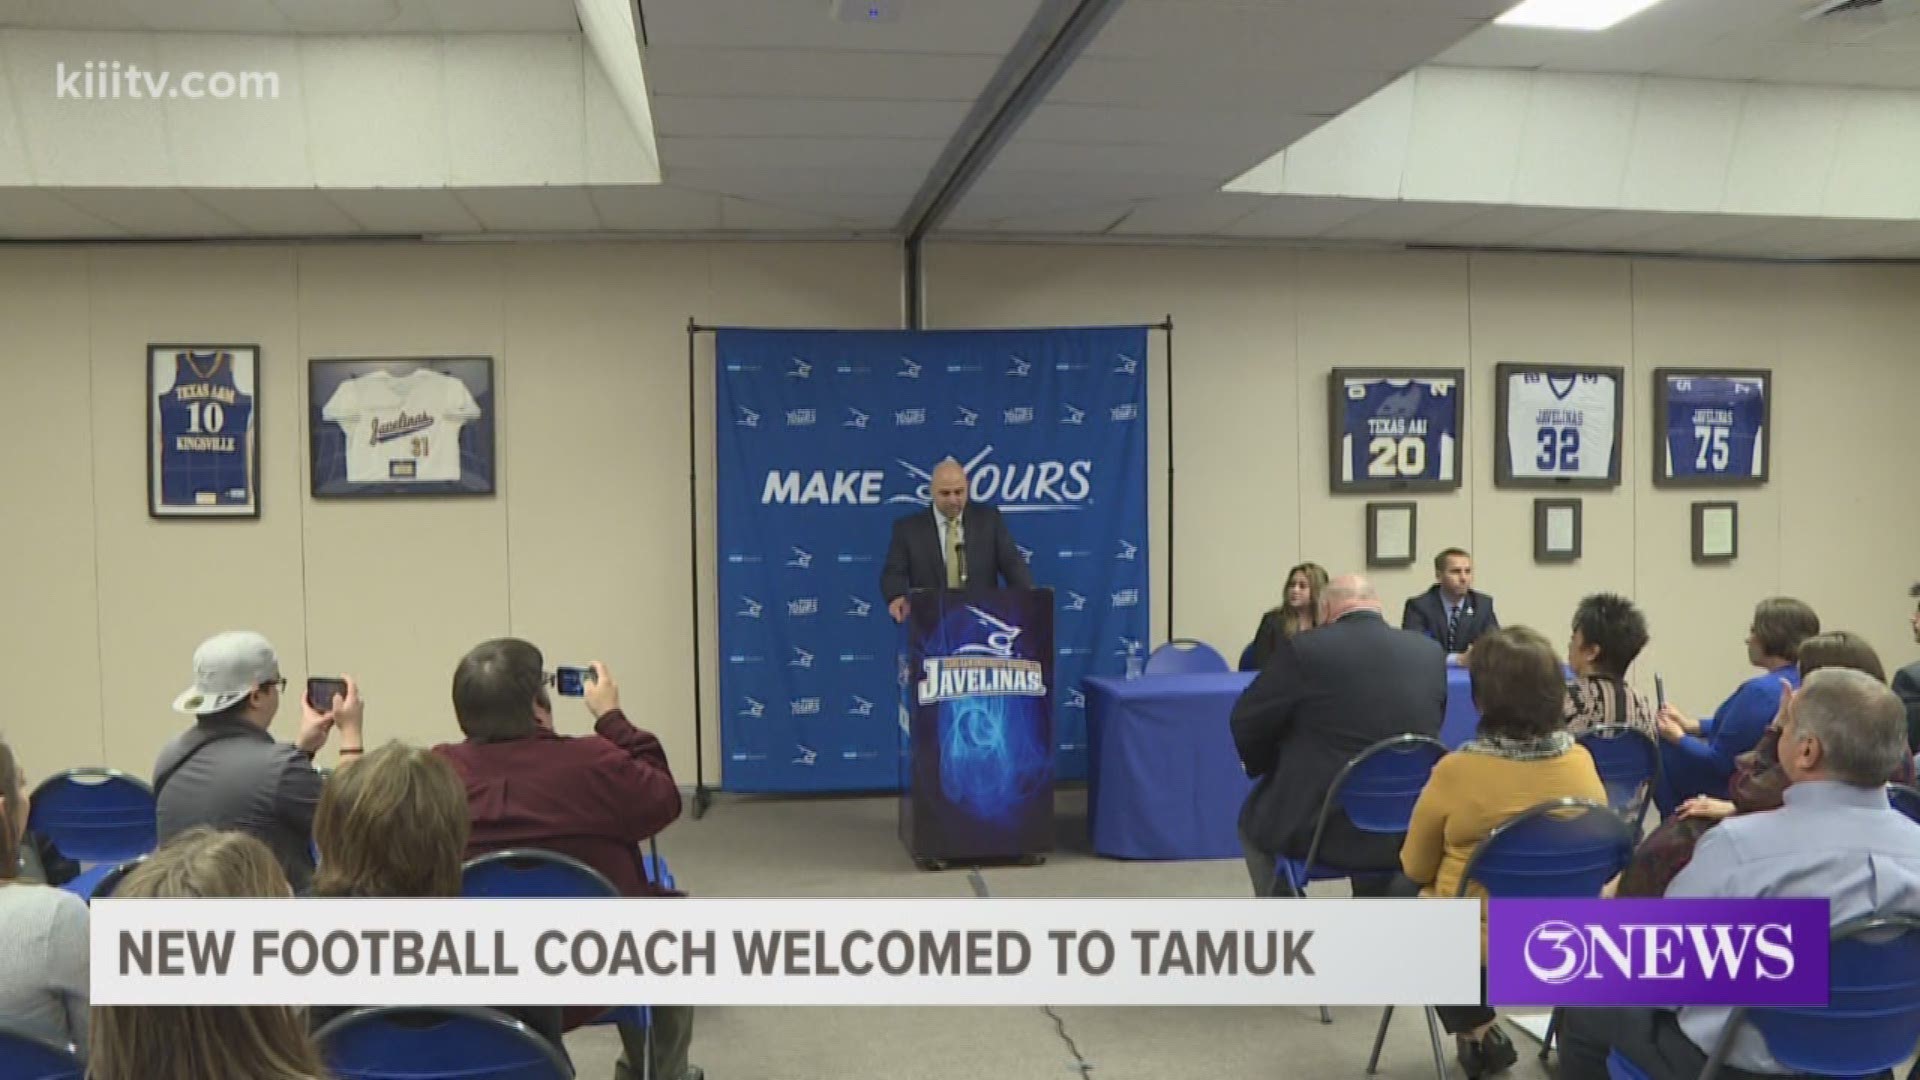 Texas A&M University-Kingsville introduced their new football coach Monday morning at McCulley Hall.